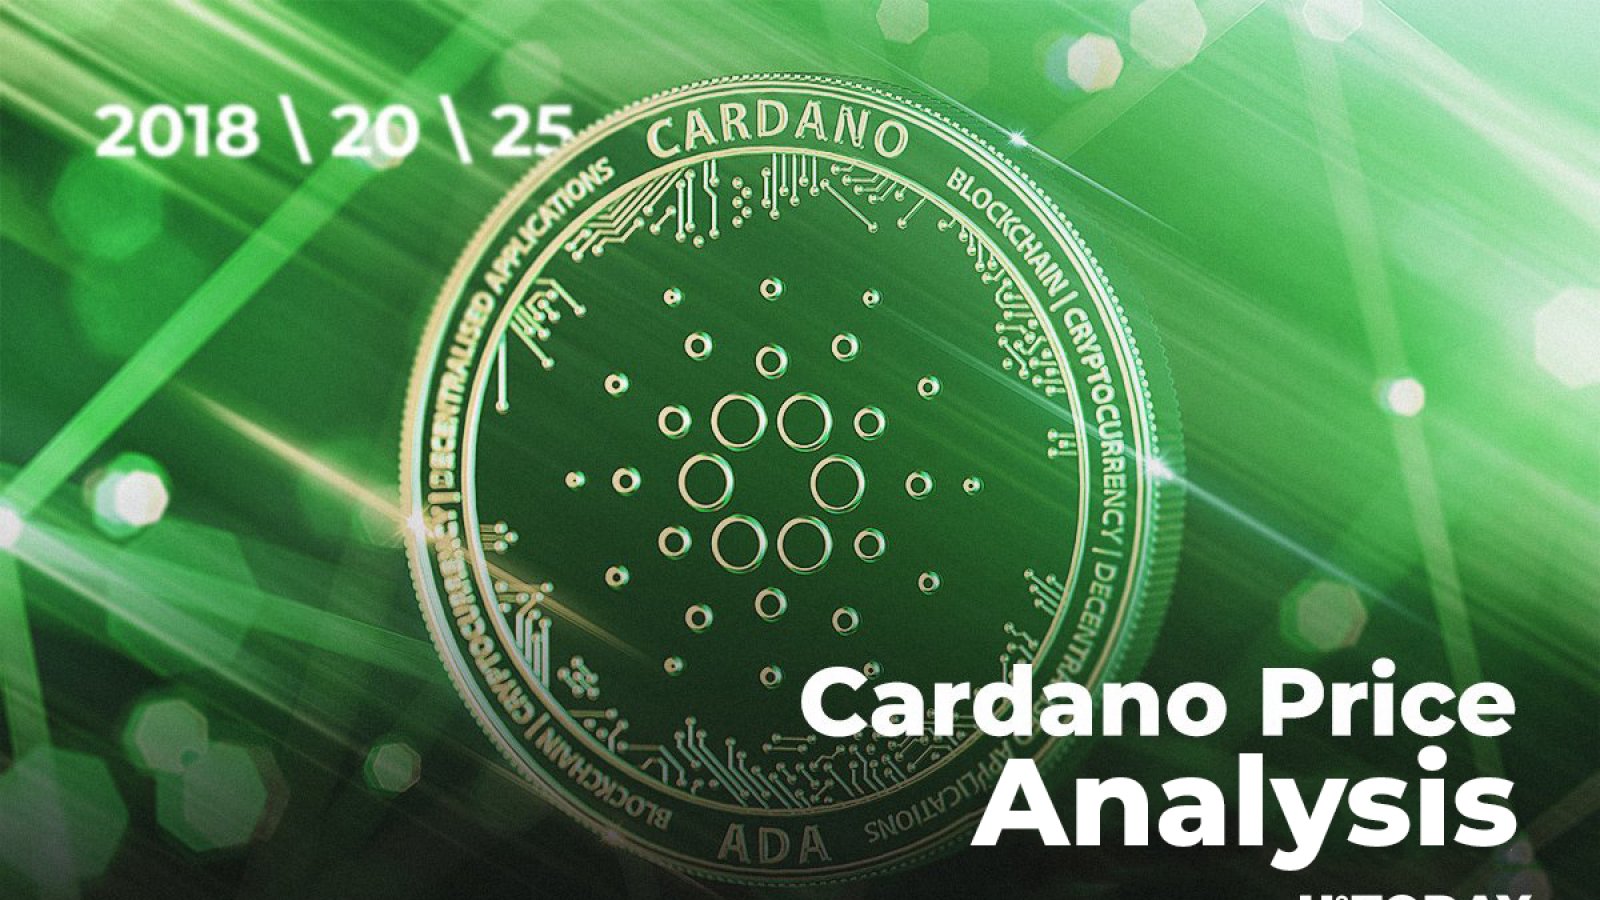 Cardano Price Analysis - How Much Might the Cost of ADA be in 2018\20\25?